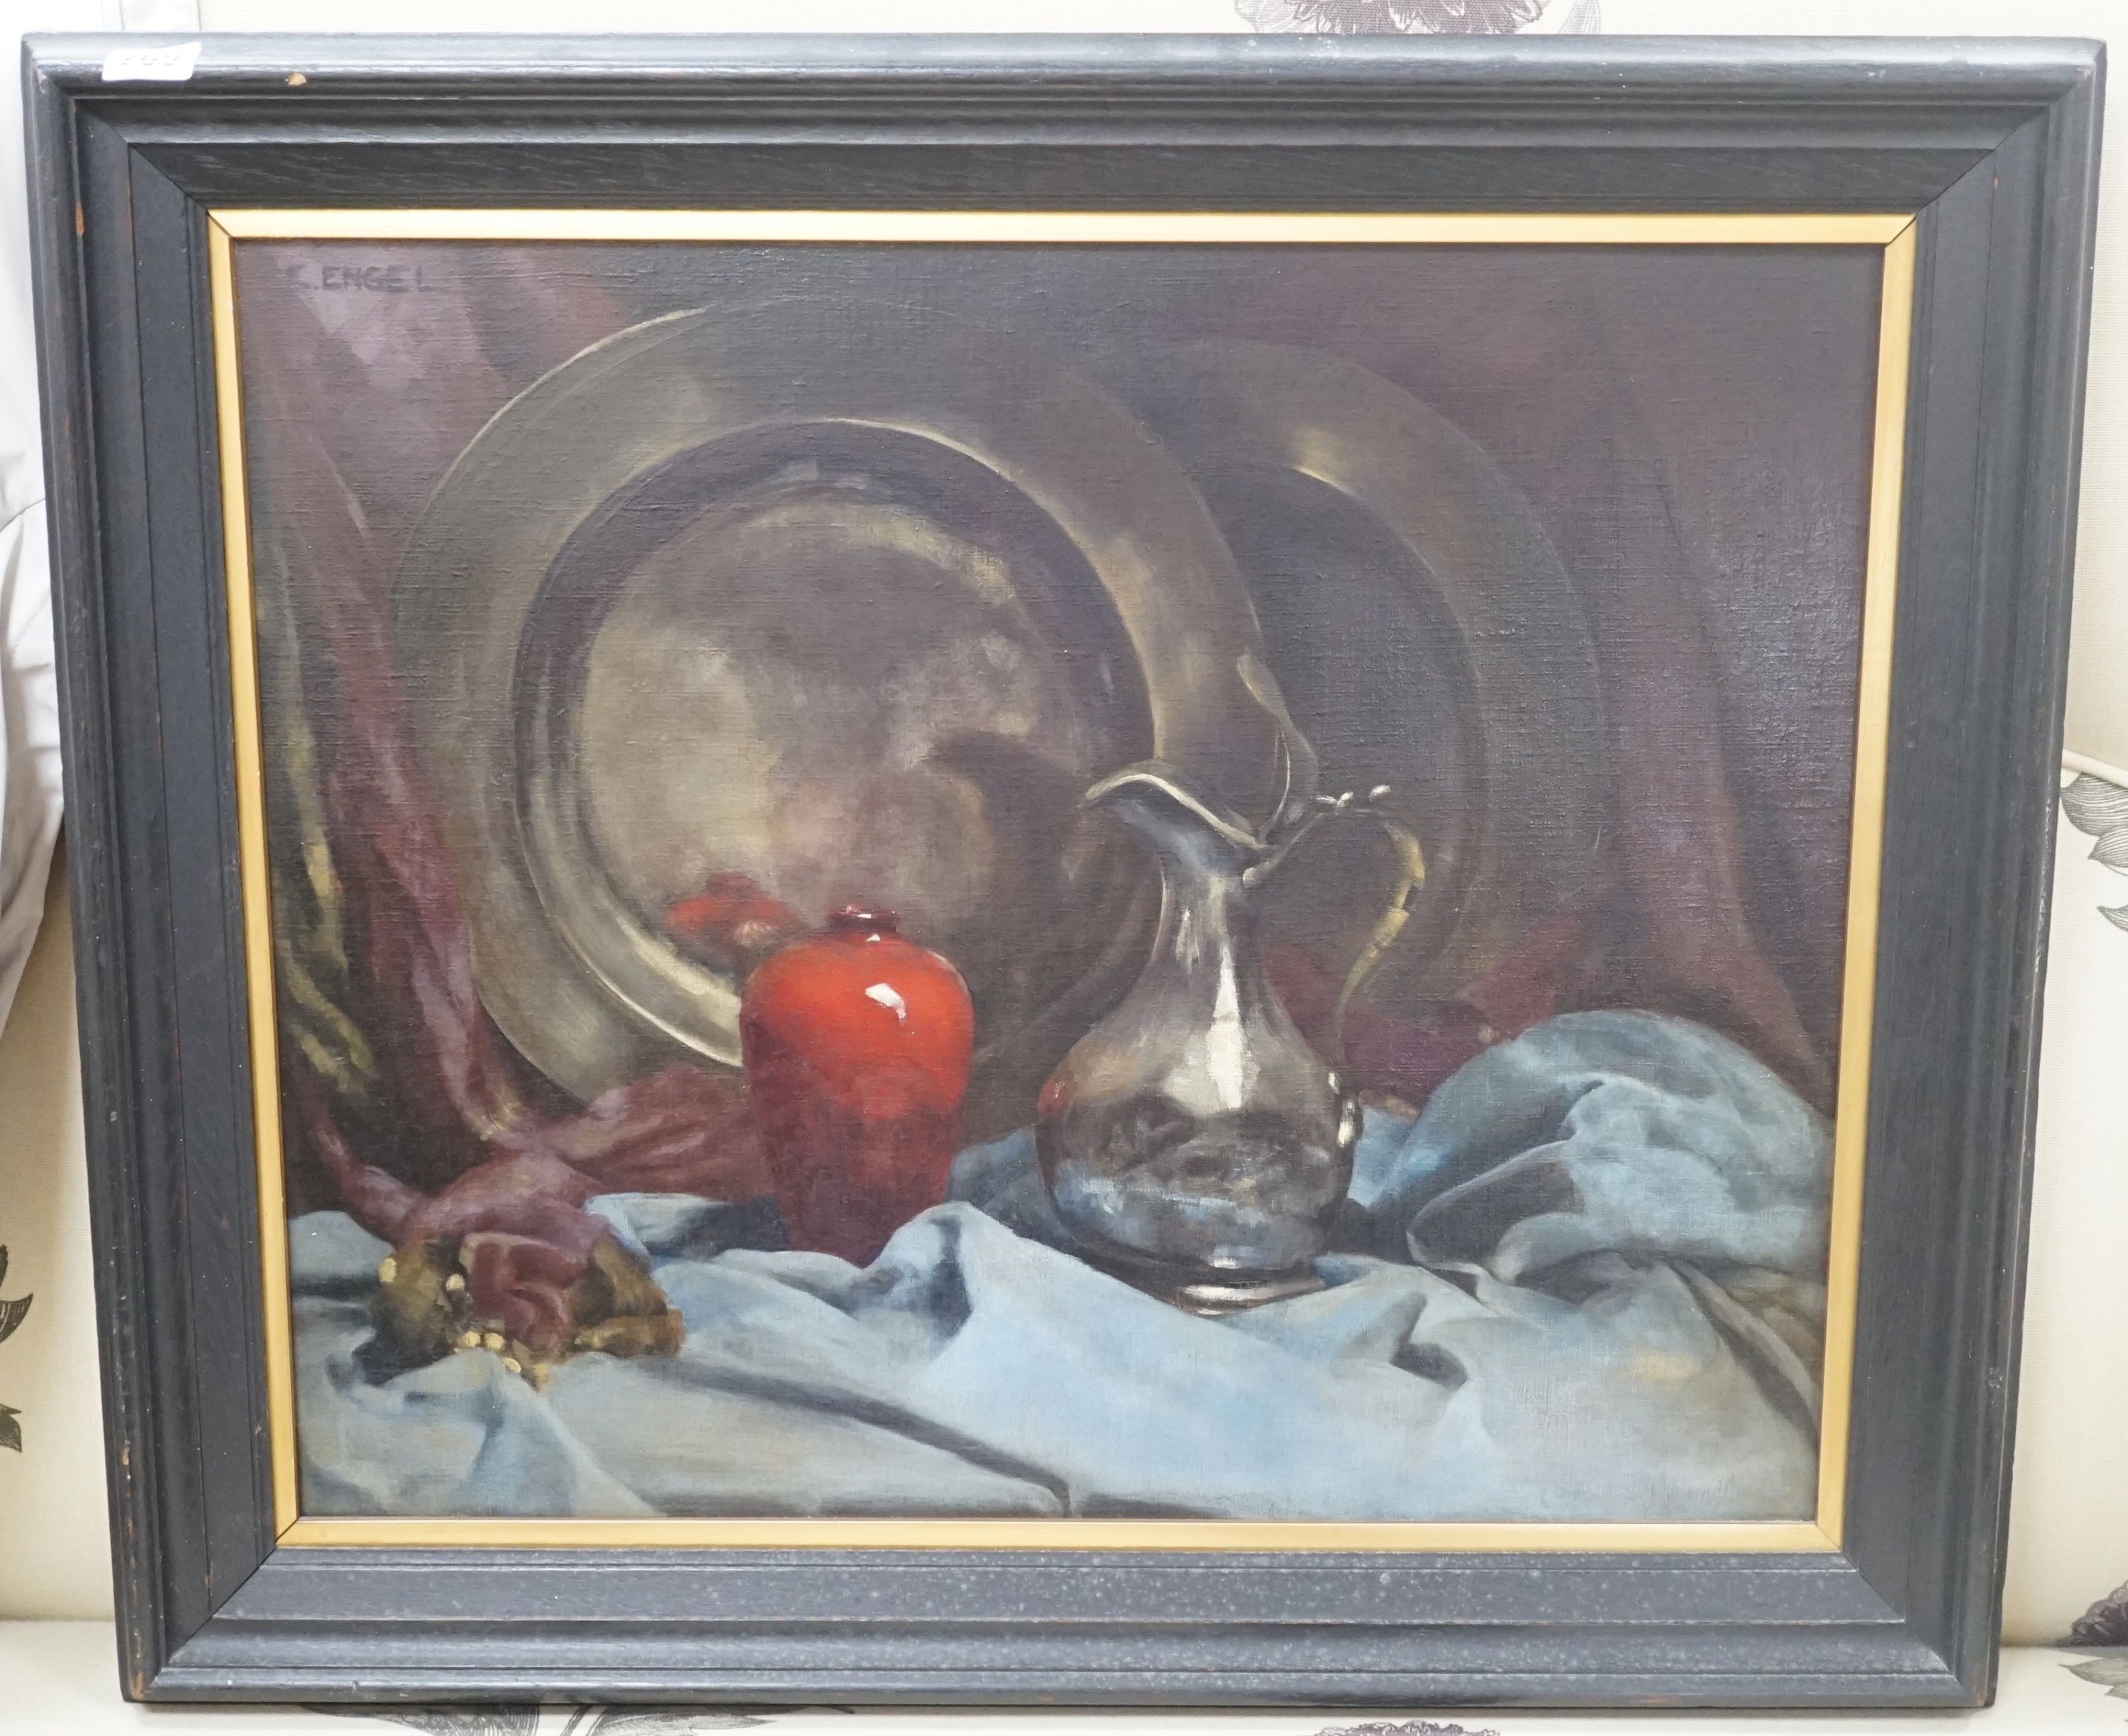 C. Engel, oil on canvas, still life of a jug, vase and chargers, signed, 52 cm at 62 cm